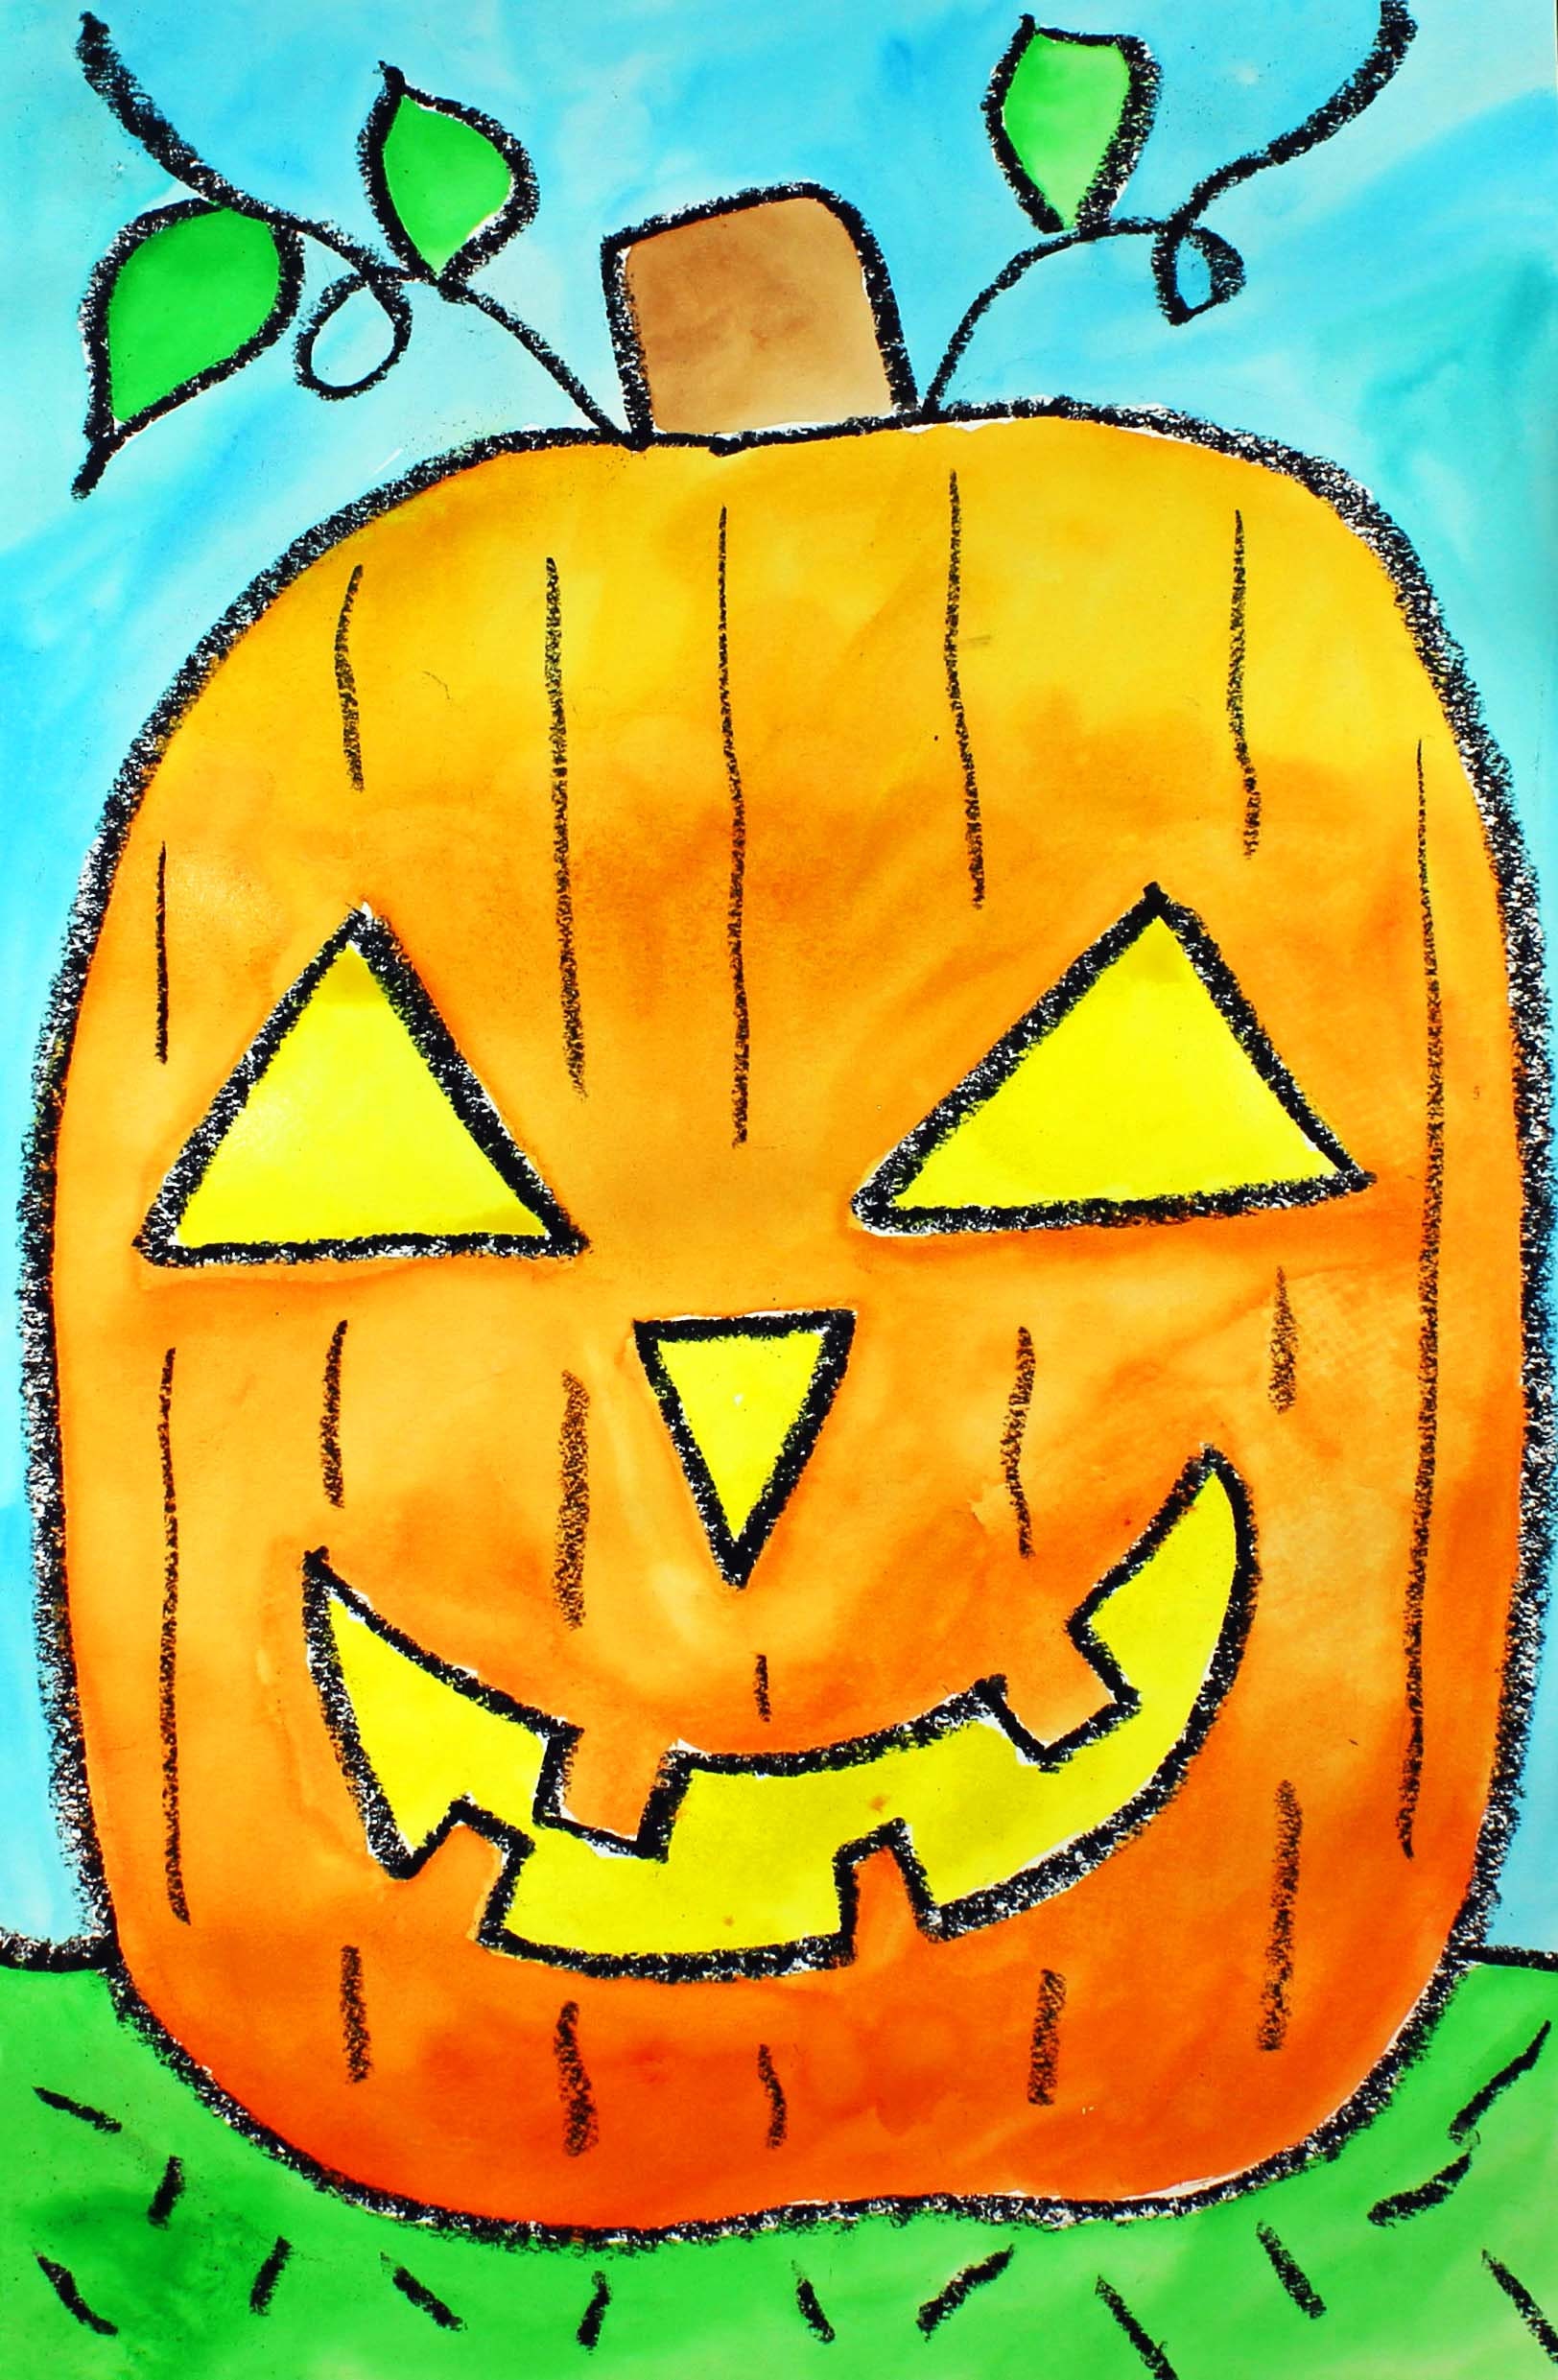 Pumpkin Face Painting for Children: Tutorials, Tips and Designs